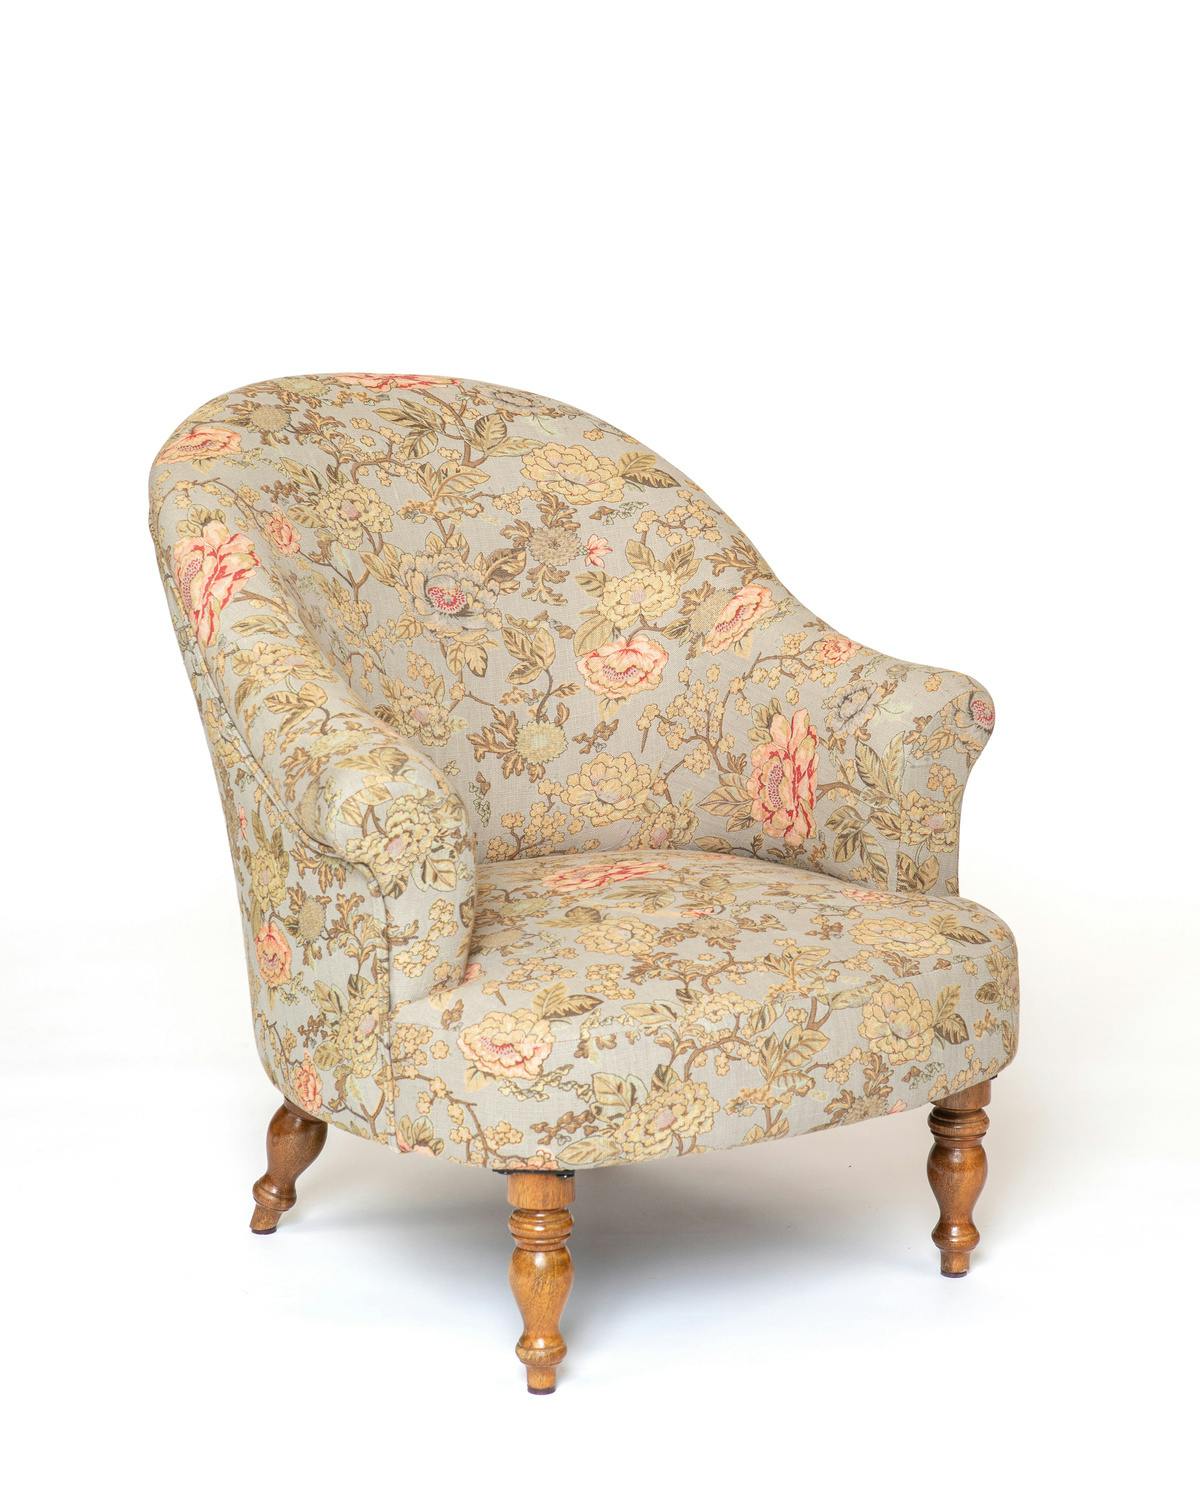 Vintage Chair (In store Exclusive), Dusty Flowers. Image #1